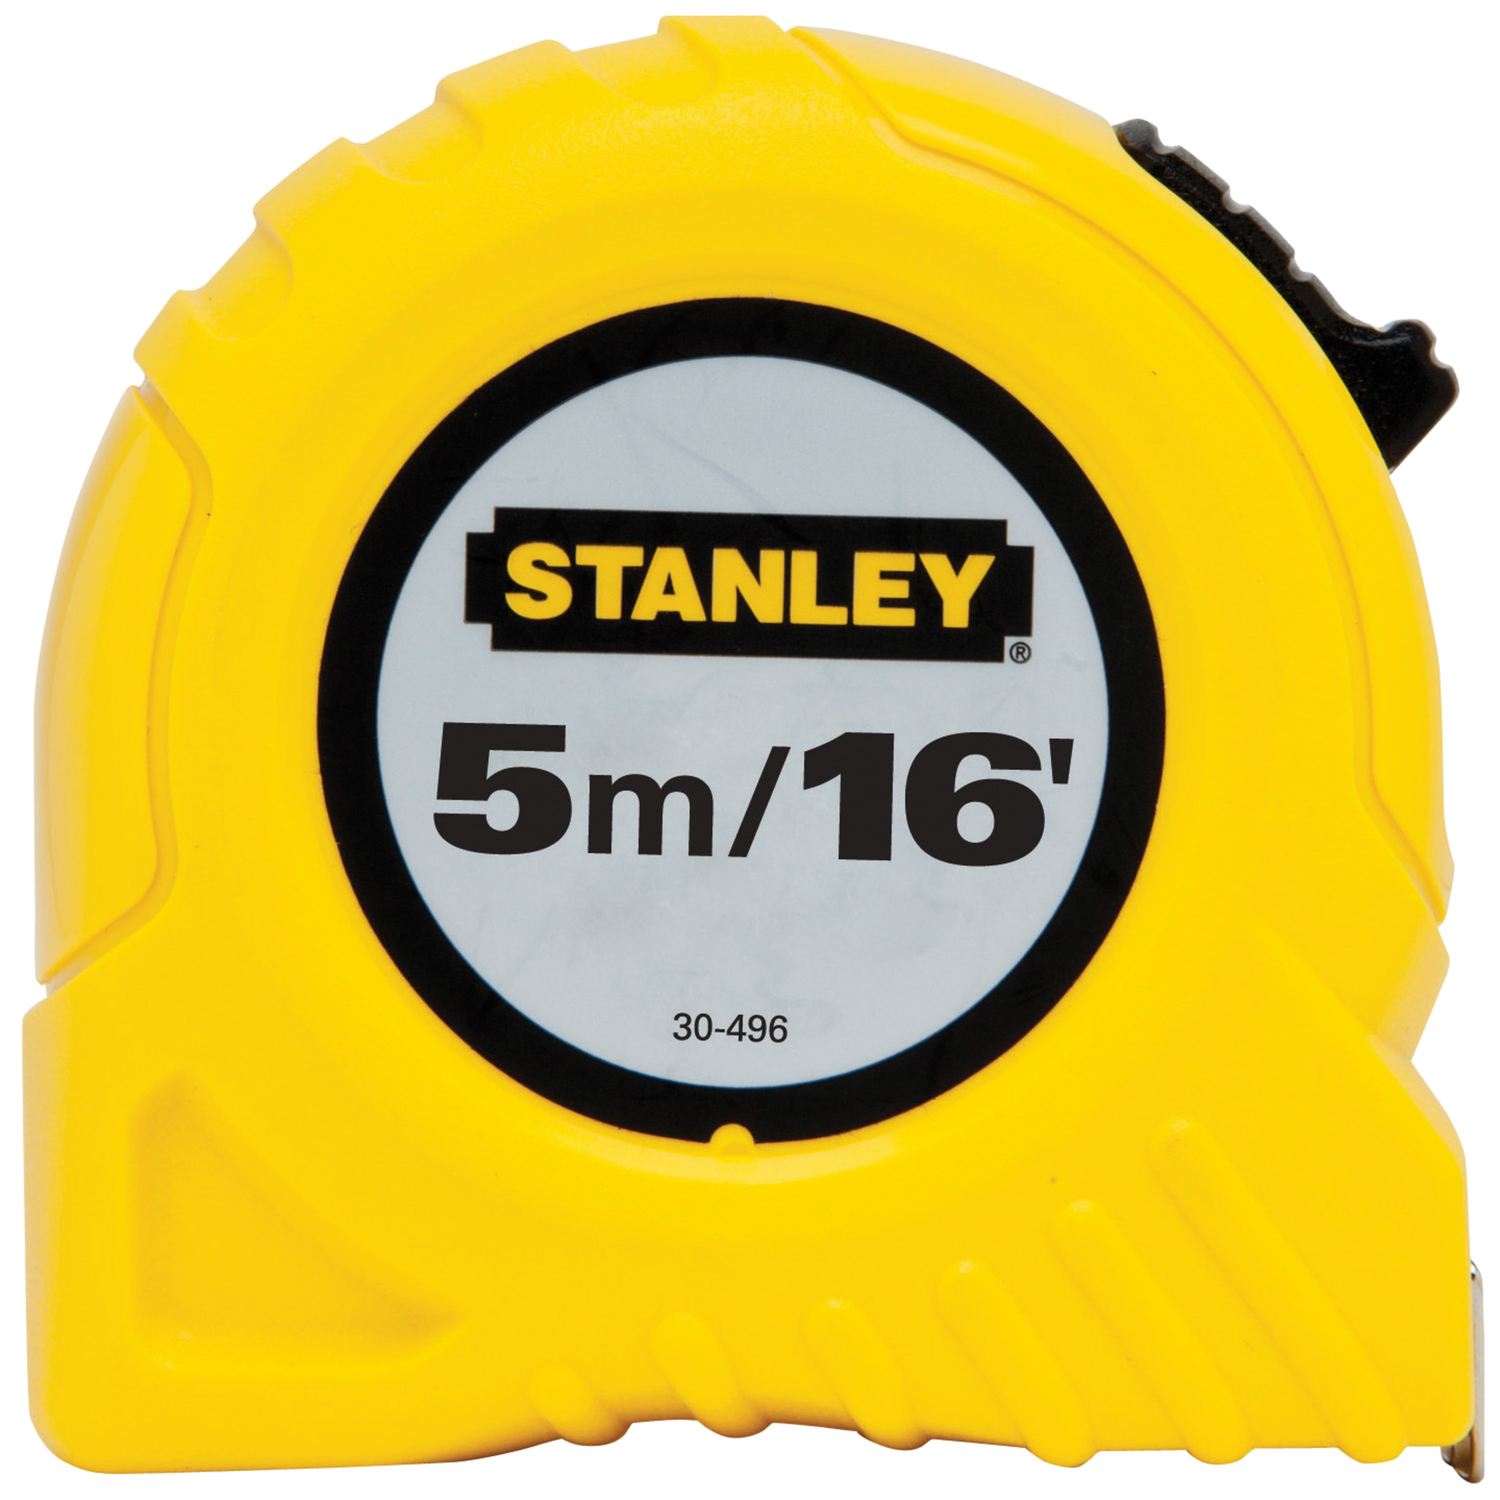 Photos - Tape Measure and Surveyor Tape Stanley 16 ft. L X 0.75 in. W Tape Measure 1 pk 30-496 